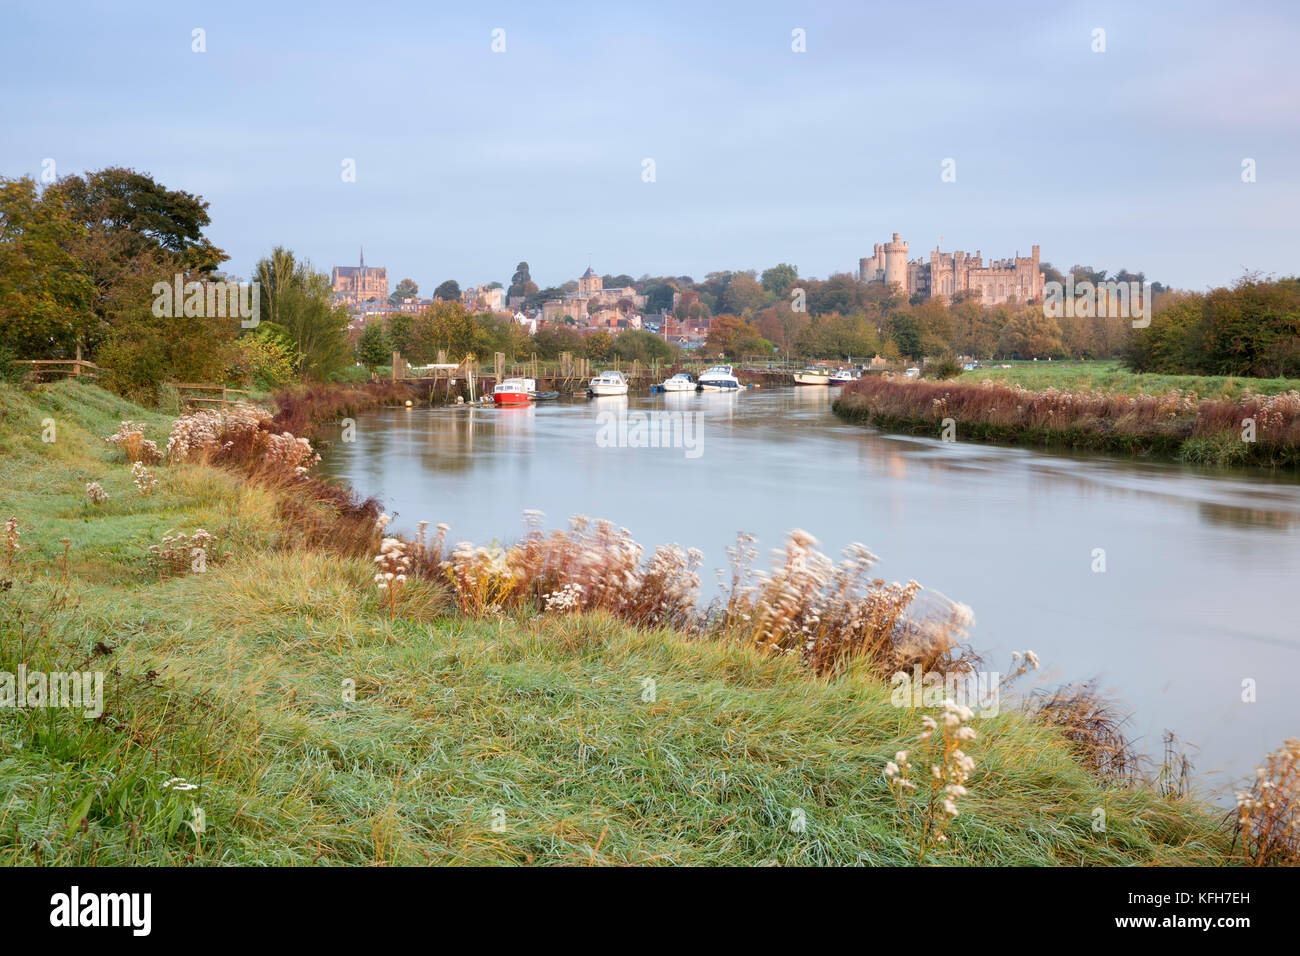 Arundel Castle on the River Arun at sunrise in autumn, Arundel, West Sussex, England, United Kingdom, Europe Stock Photo